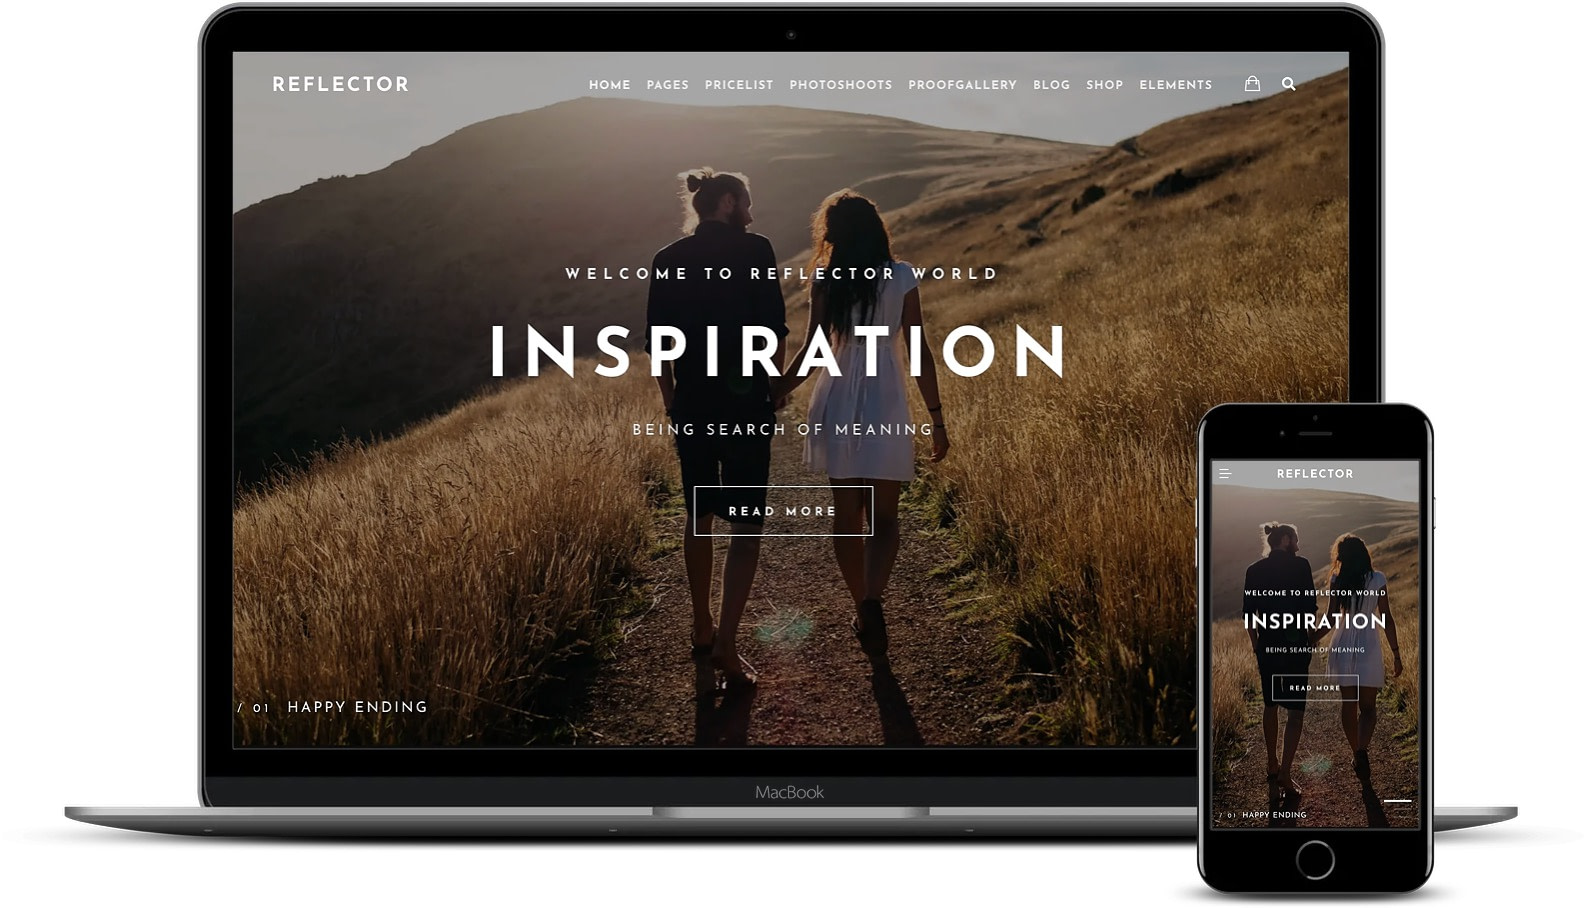 Reflector is a WordPress theme for photographers